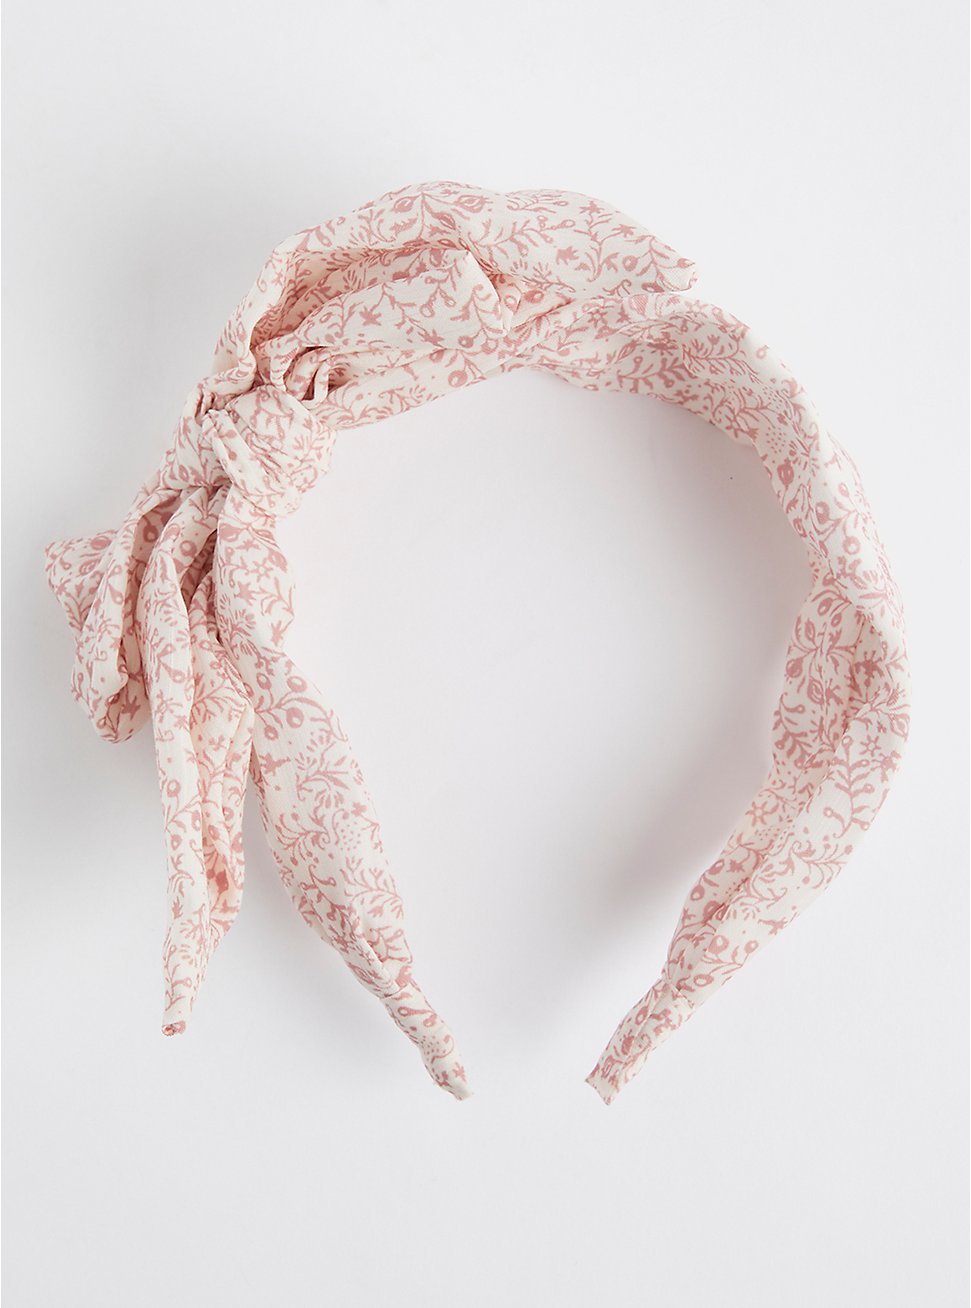 Plus Size Headband - Floral Bow Pink, , hi-res